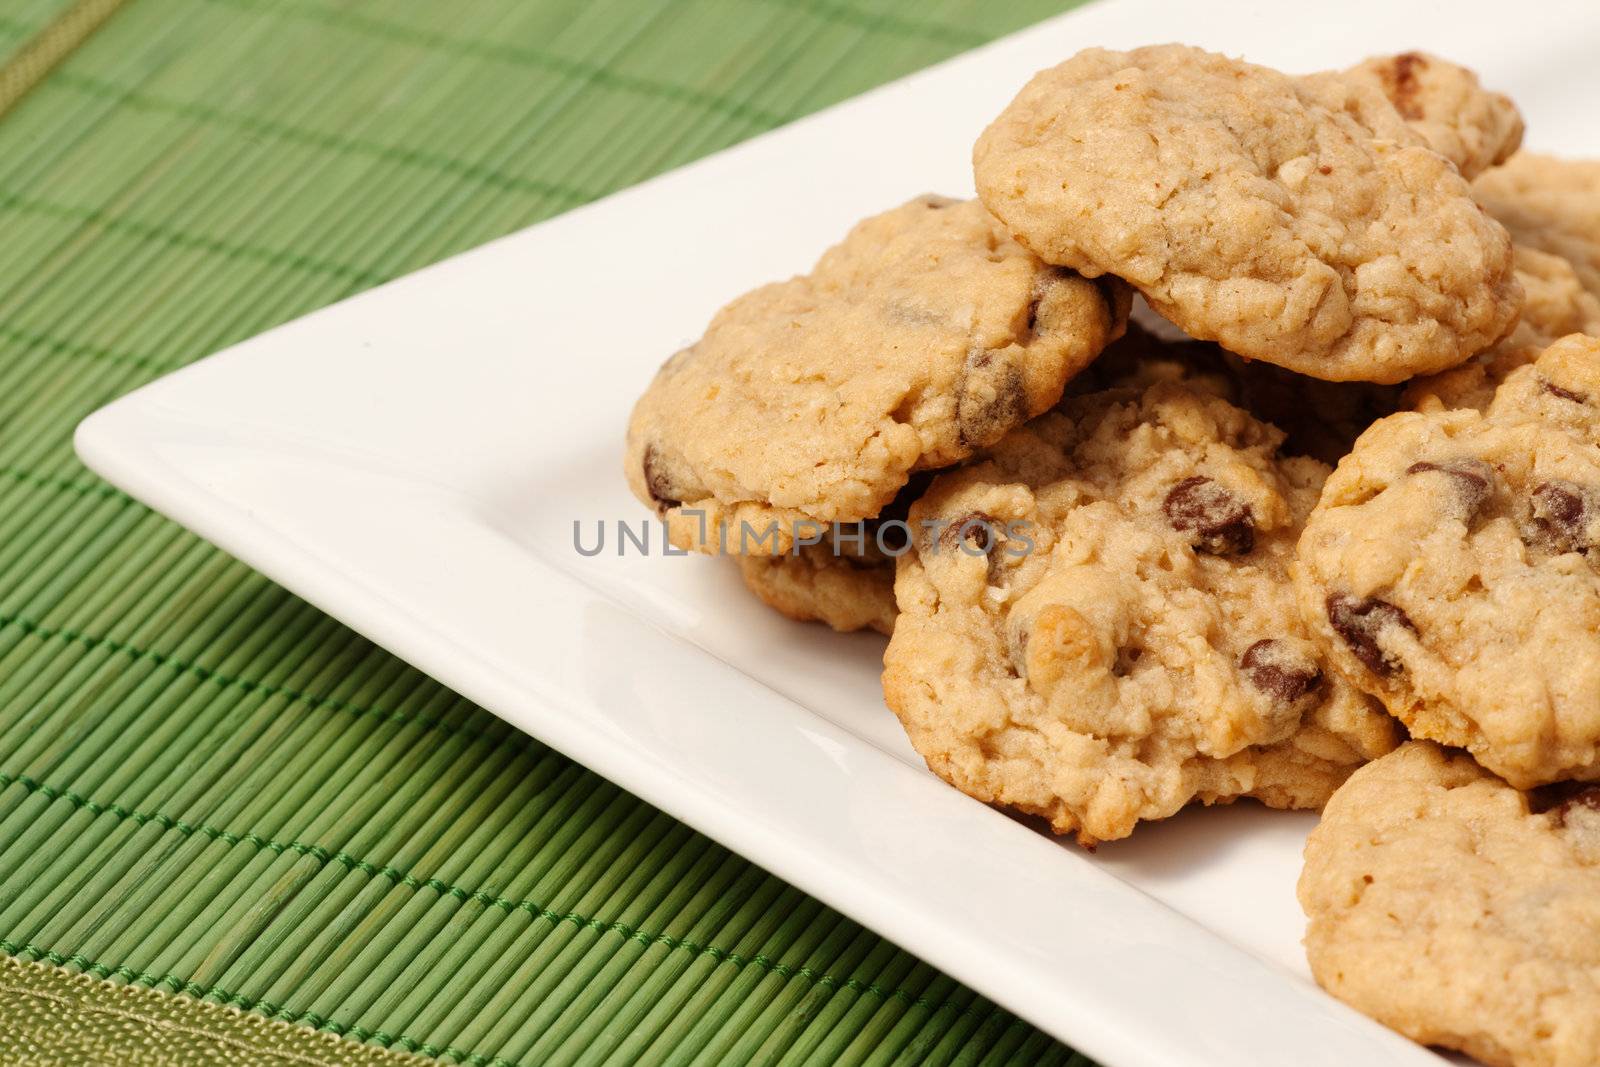 A plate of oatmeal chocolate chip cookies on a green mat